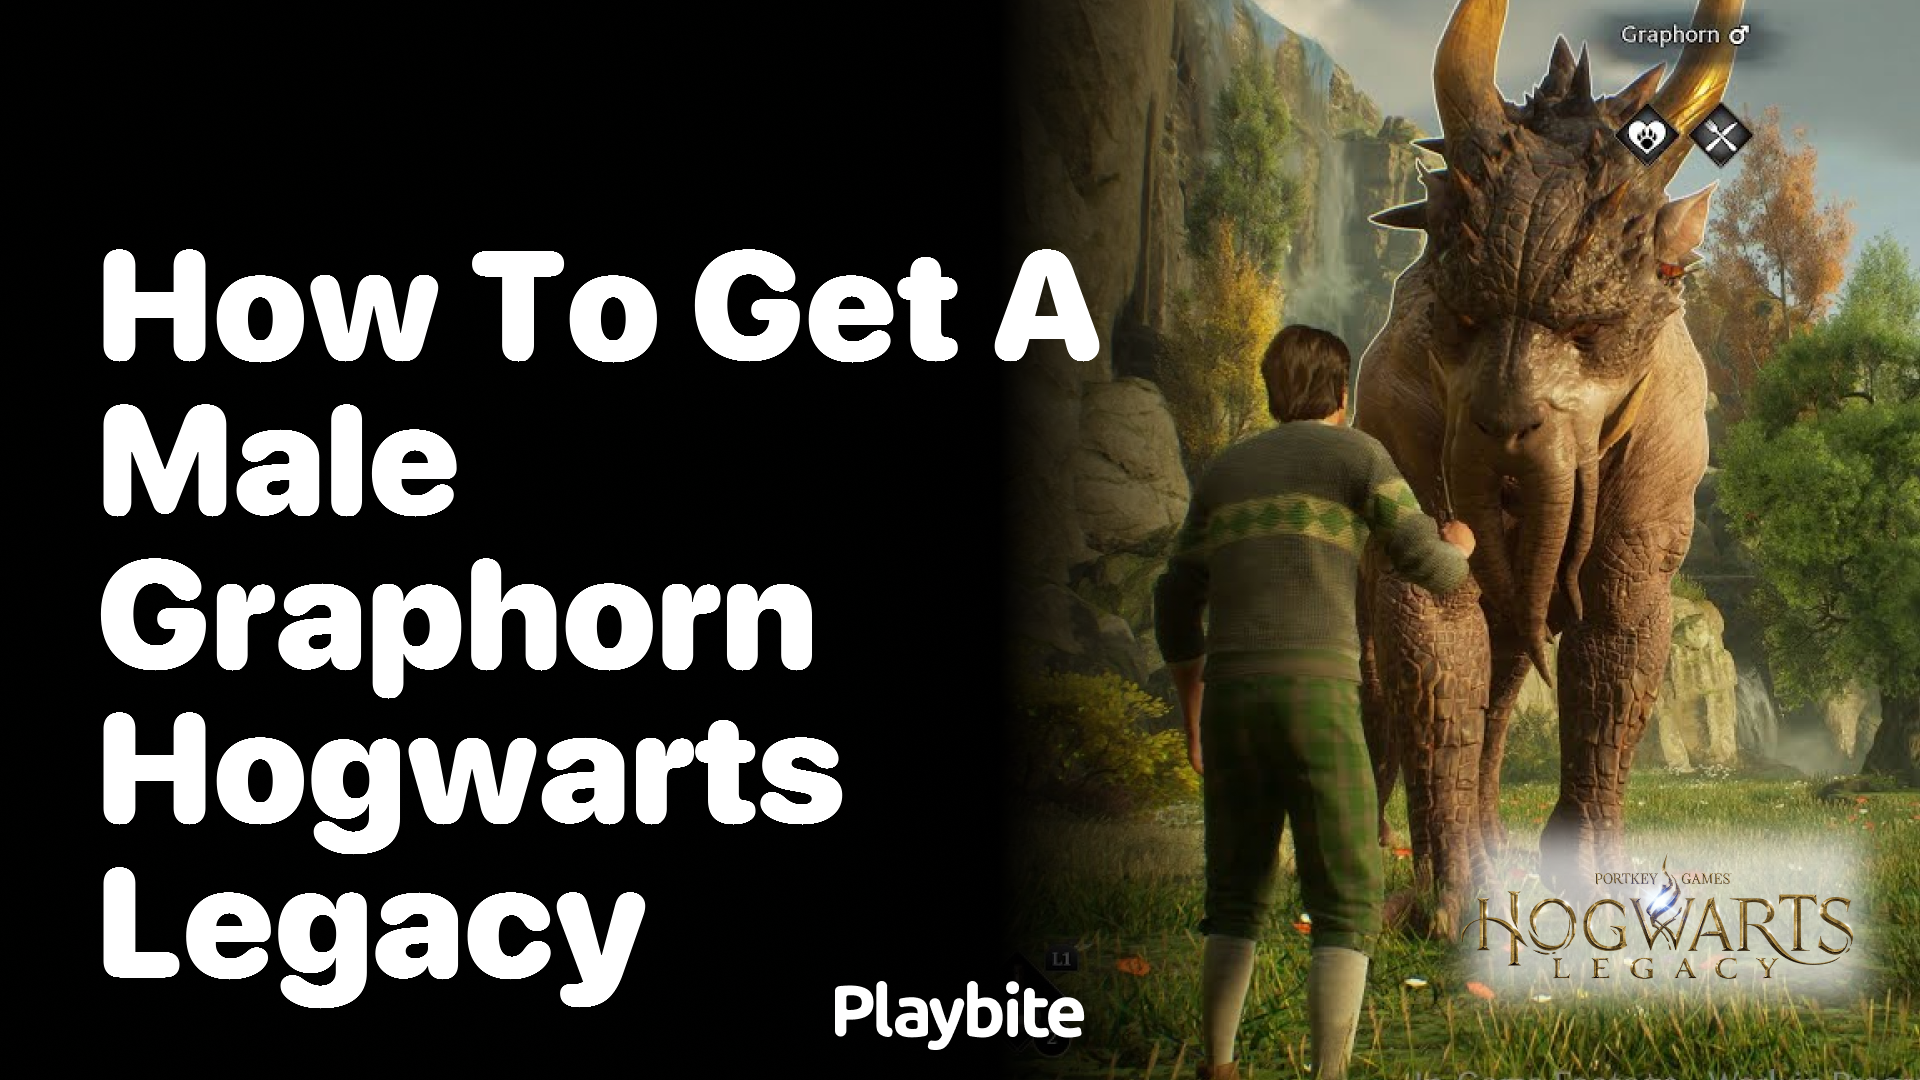 How to get a male Graphorn in Hogwarts Legacy